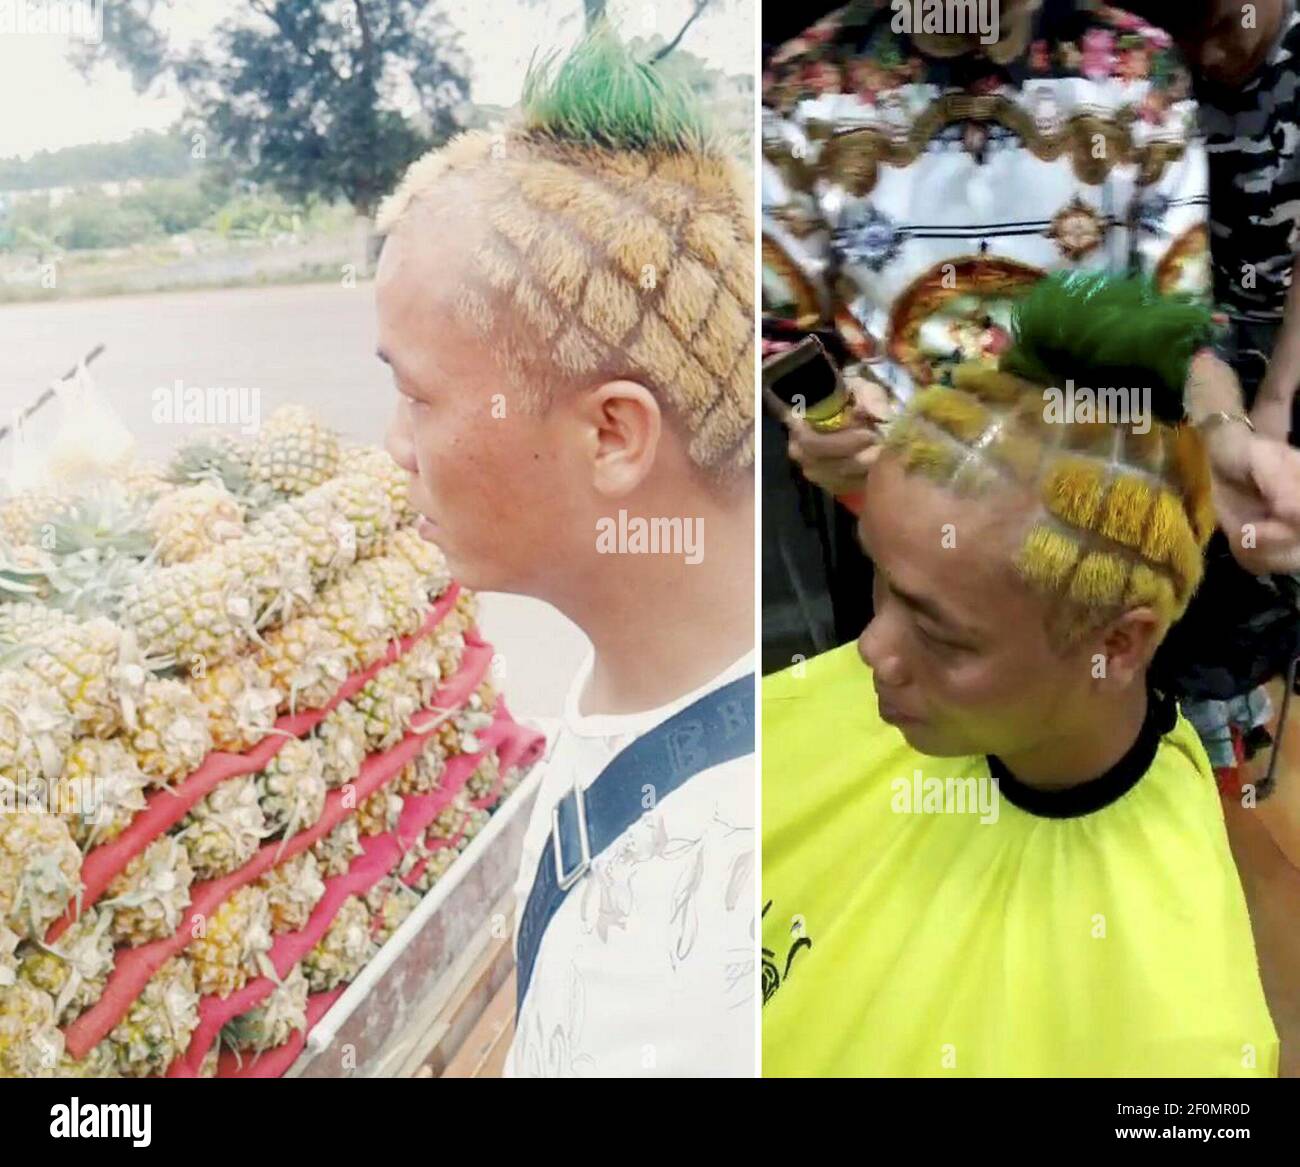 In this undated and composite photo, Chinese man Su Changfeng with pineapple-shaped hair sells pineapples on a road, left, and has his hair cut at a barber shop in Nanning city, south China's Guangxi Zhuang Autonomous Region. A Chinese man cut his hair in the shape of a pineapple to help sell his pineapple in Nanning city, south China's Guangxi Zhuang Autonomous Region. The man named Su Changfeng started selling pineapples six years ago. He went viral on the Internet through his pineapple-shaped hair. (Photo by Yi fang - Imaginechina/Sipa USA) Stock Photo